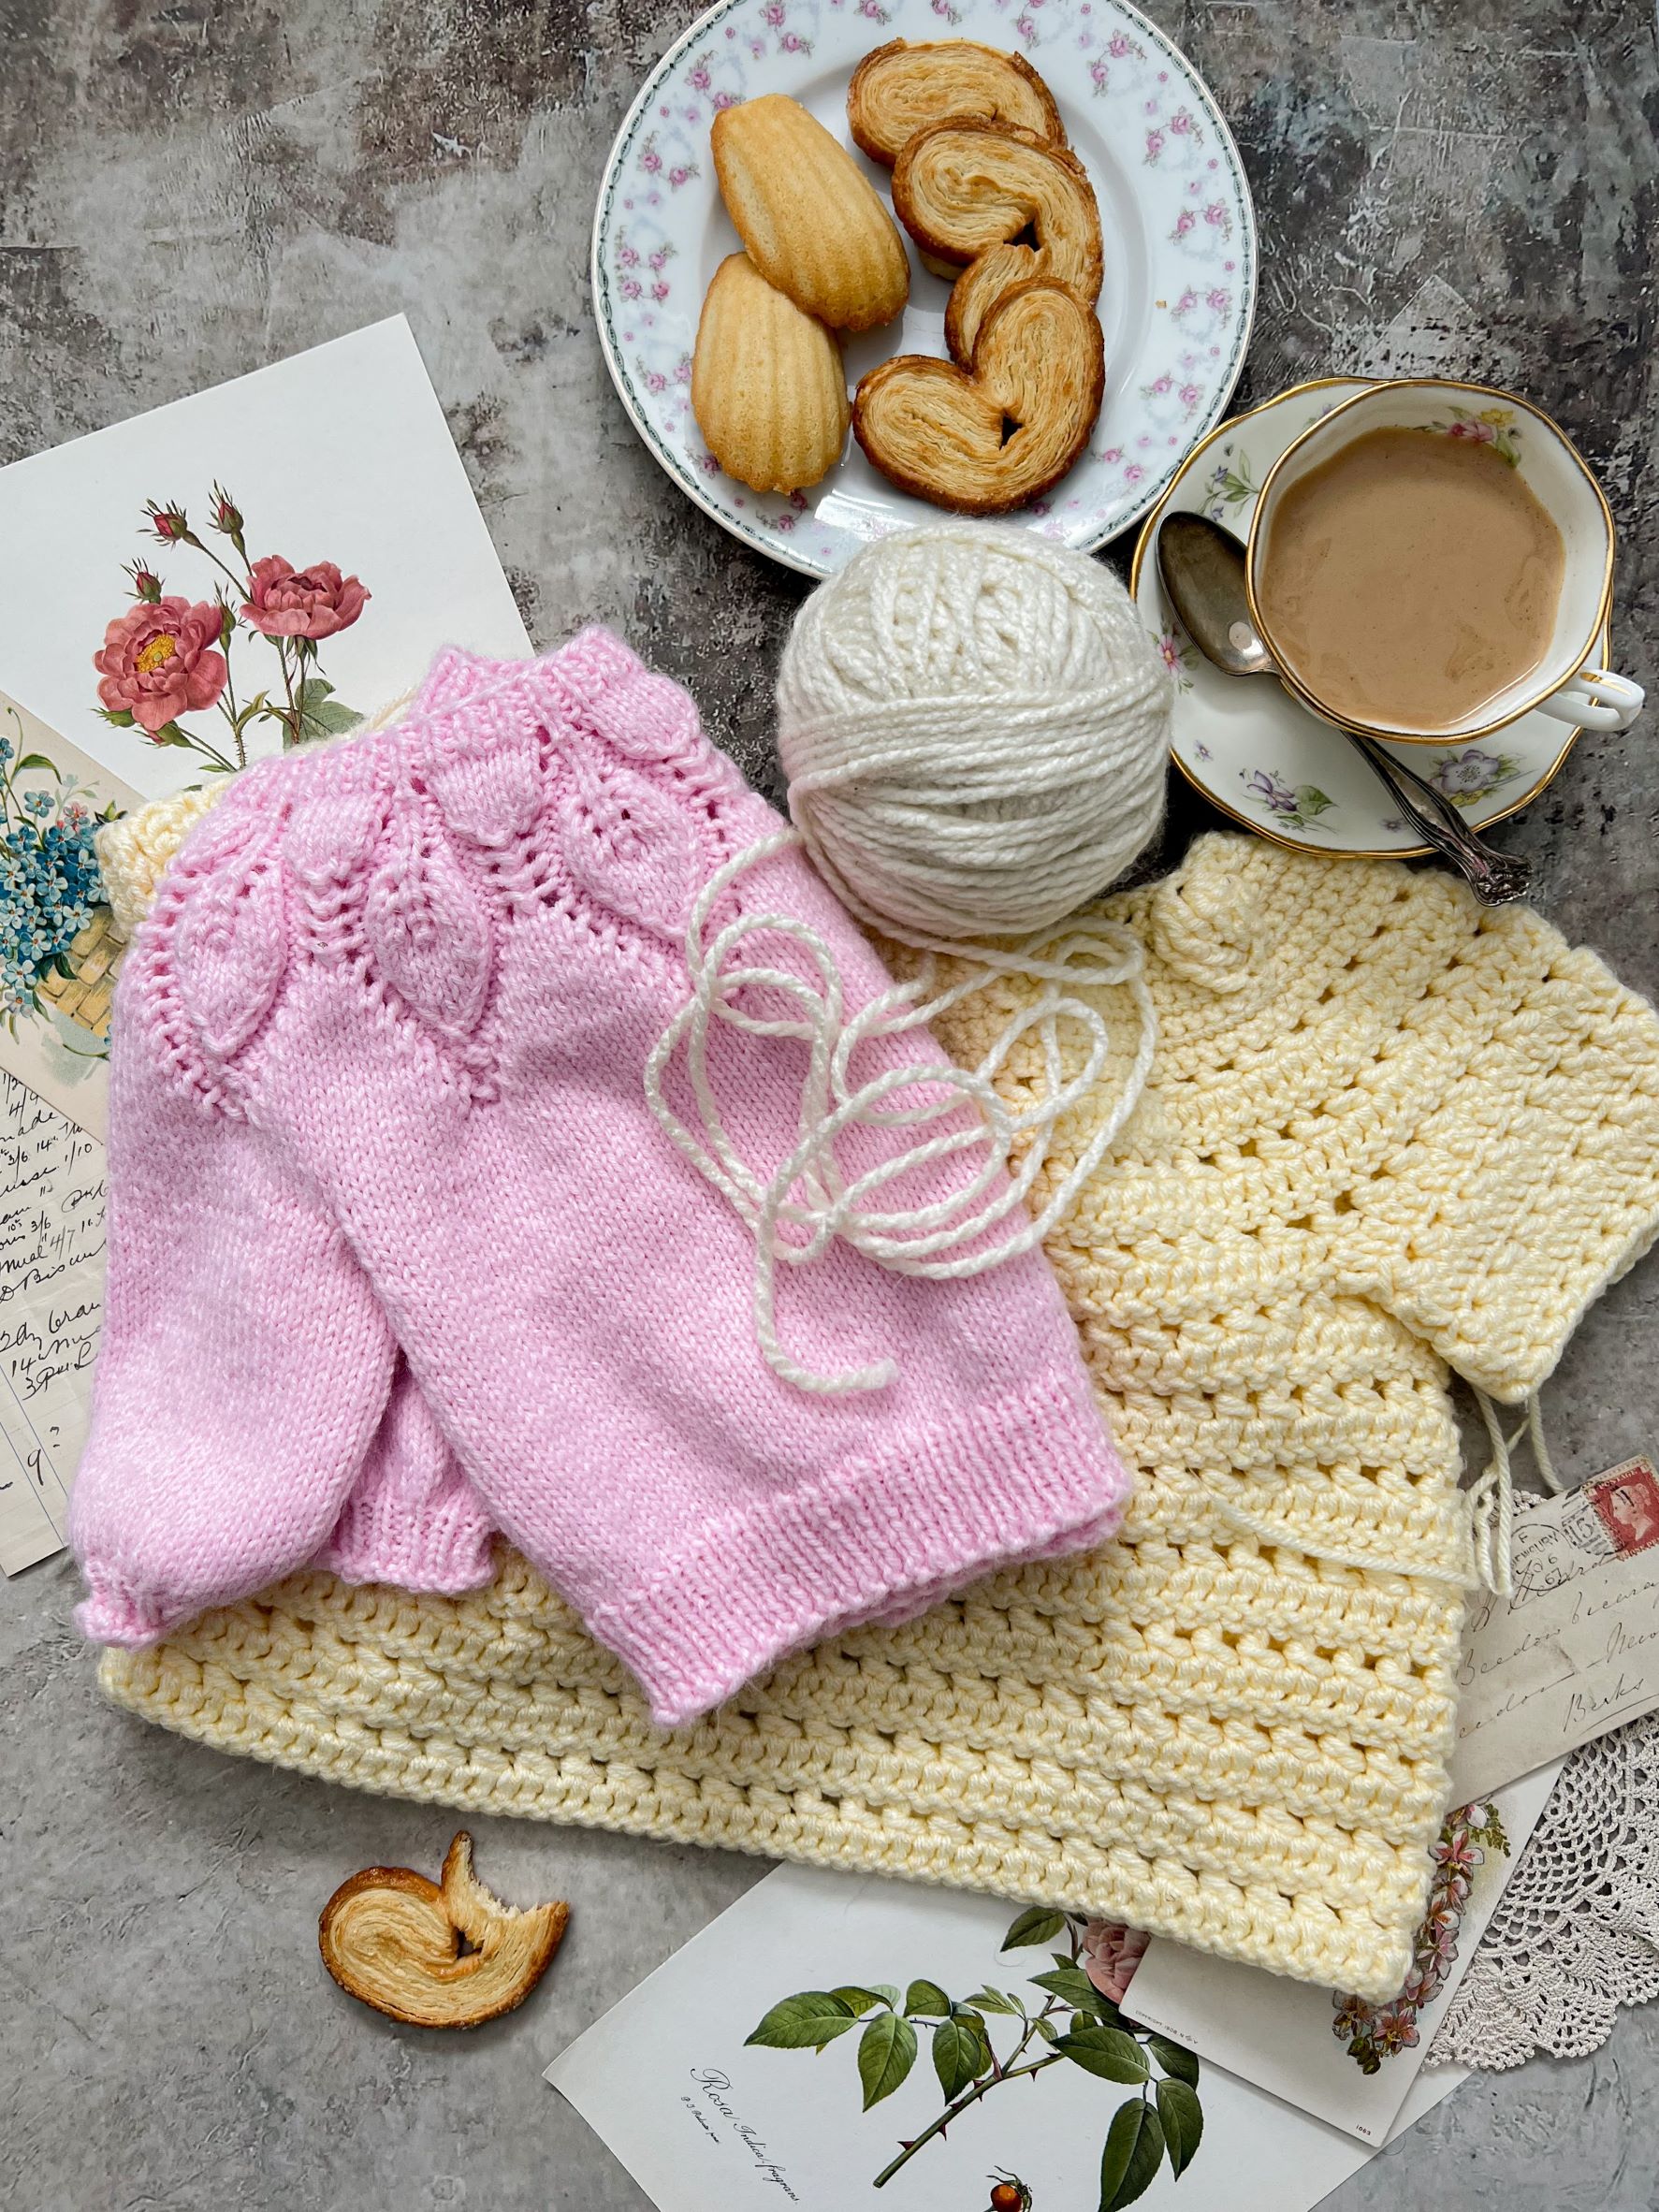 Ravelry: Loops & Threads Everyday Cotton Patterned